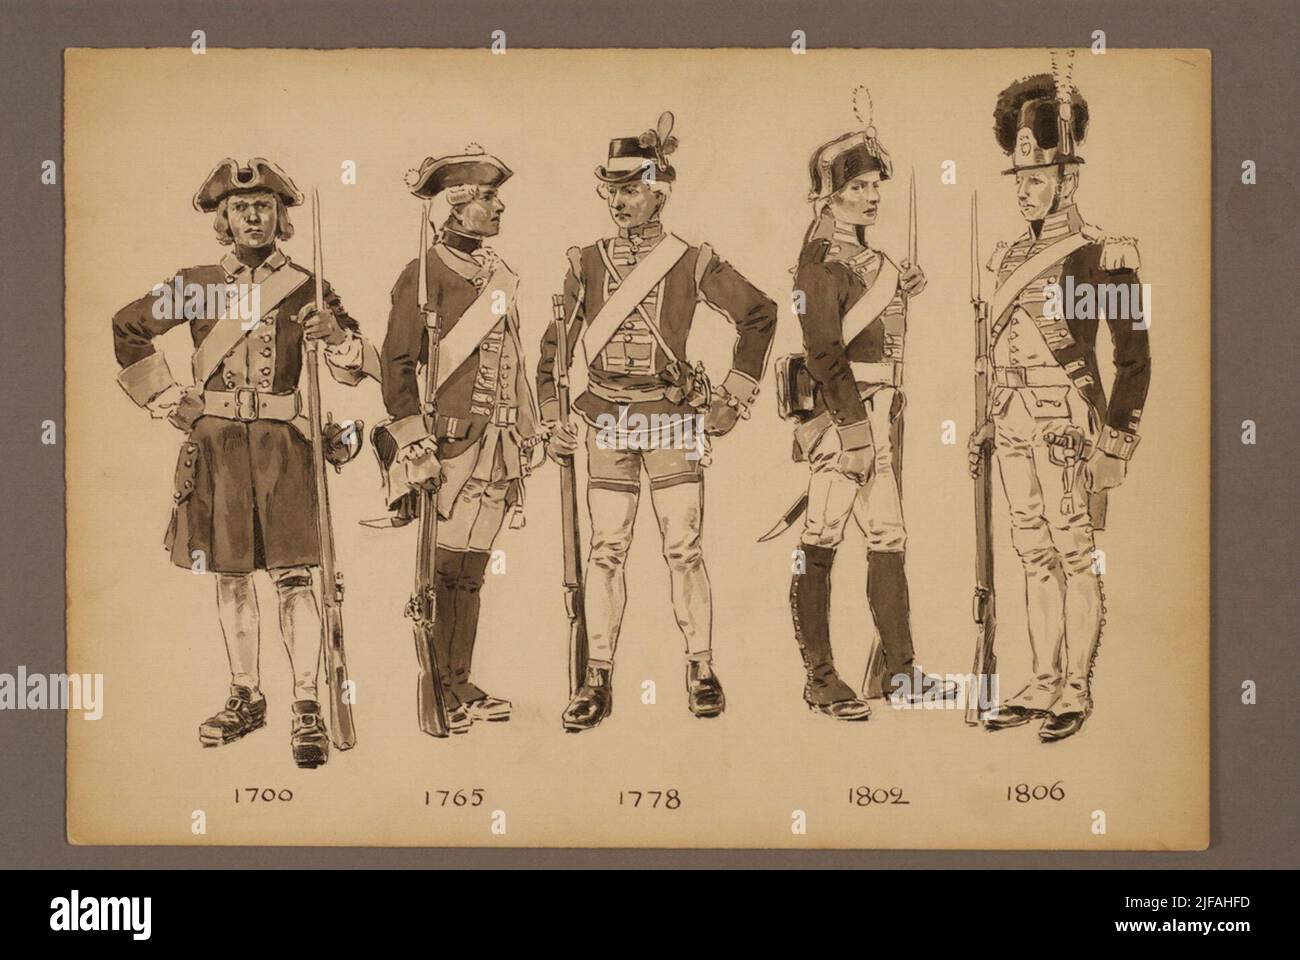 The poster with uniform for Svea Livgarde for the years 1700-1806, designed  by Einar von Strokirch. Belongs to Armemuseum's archive Stock Photo - Alamy